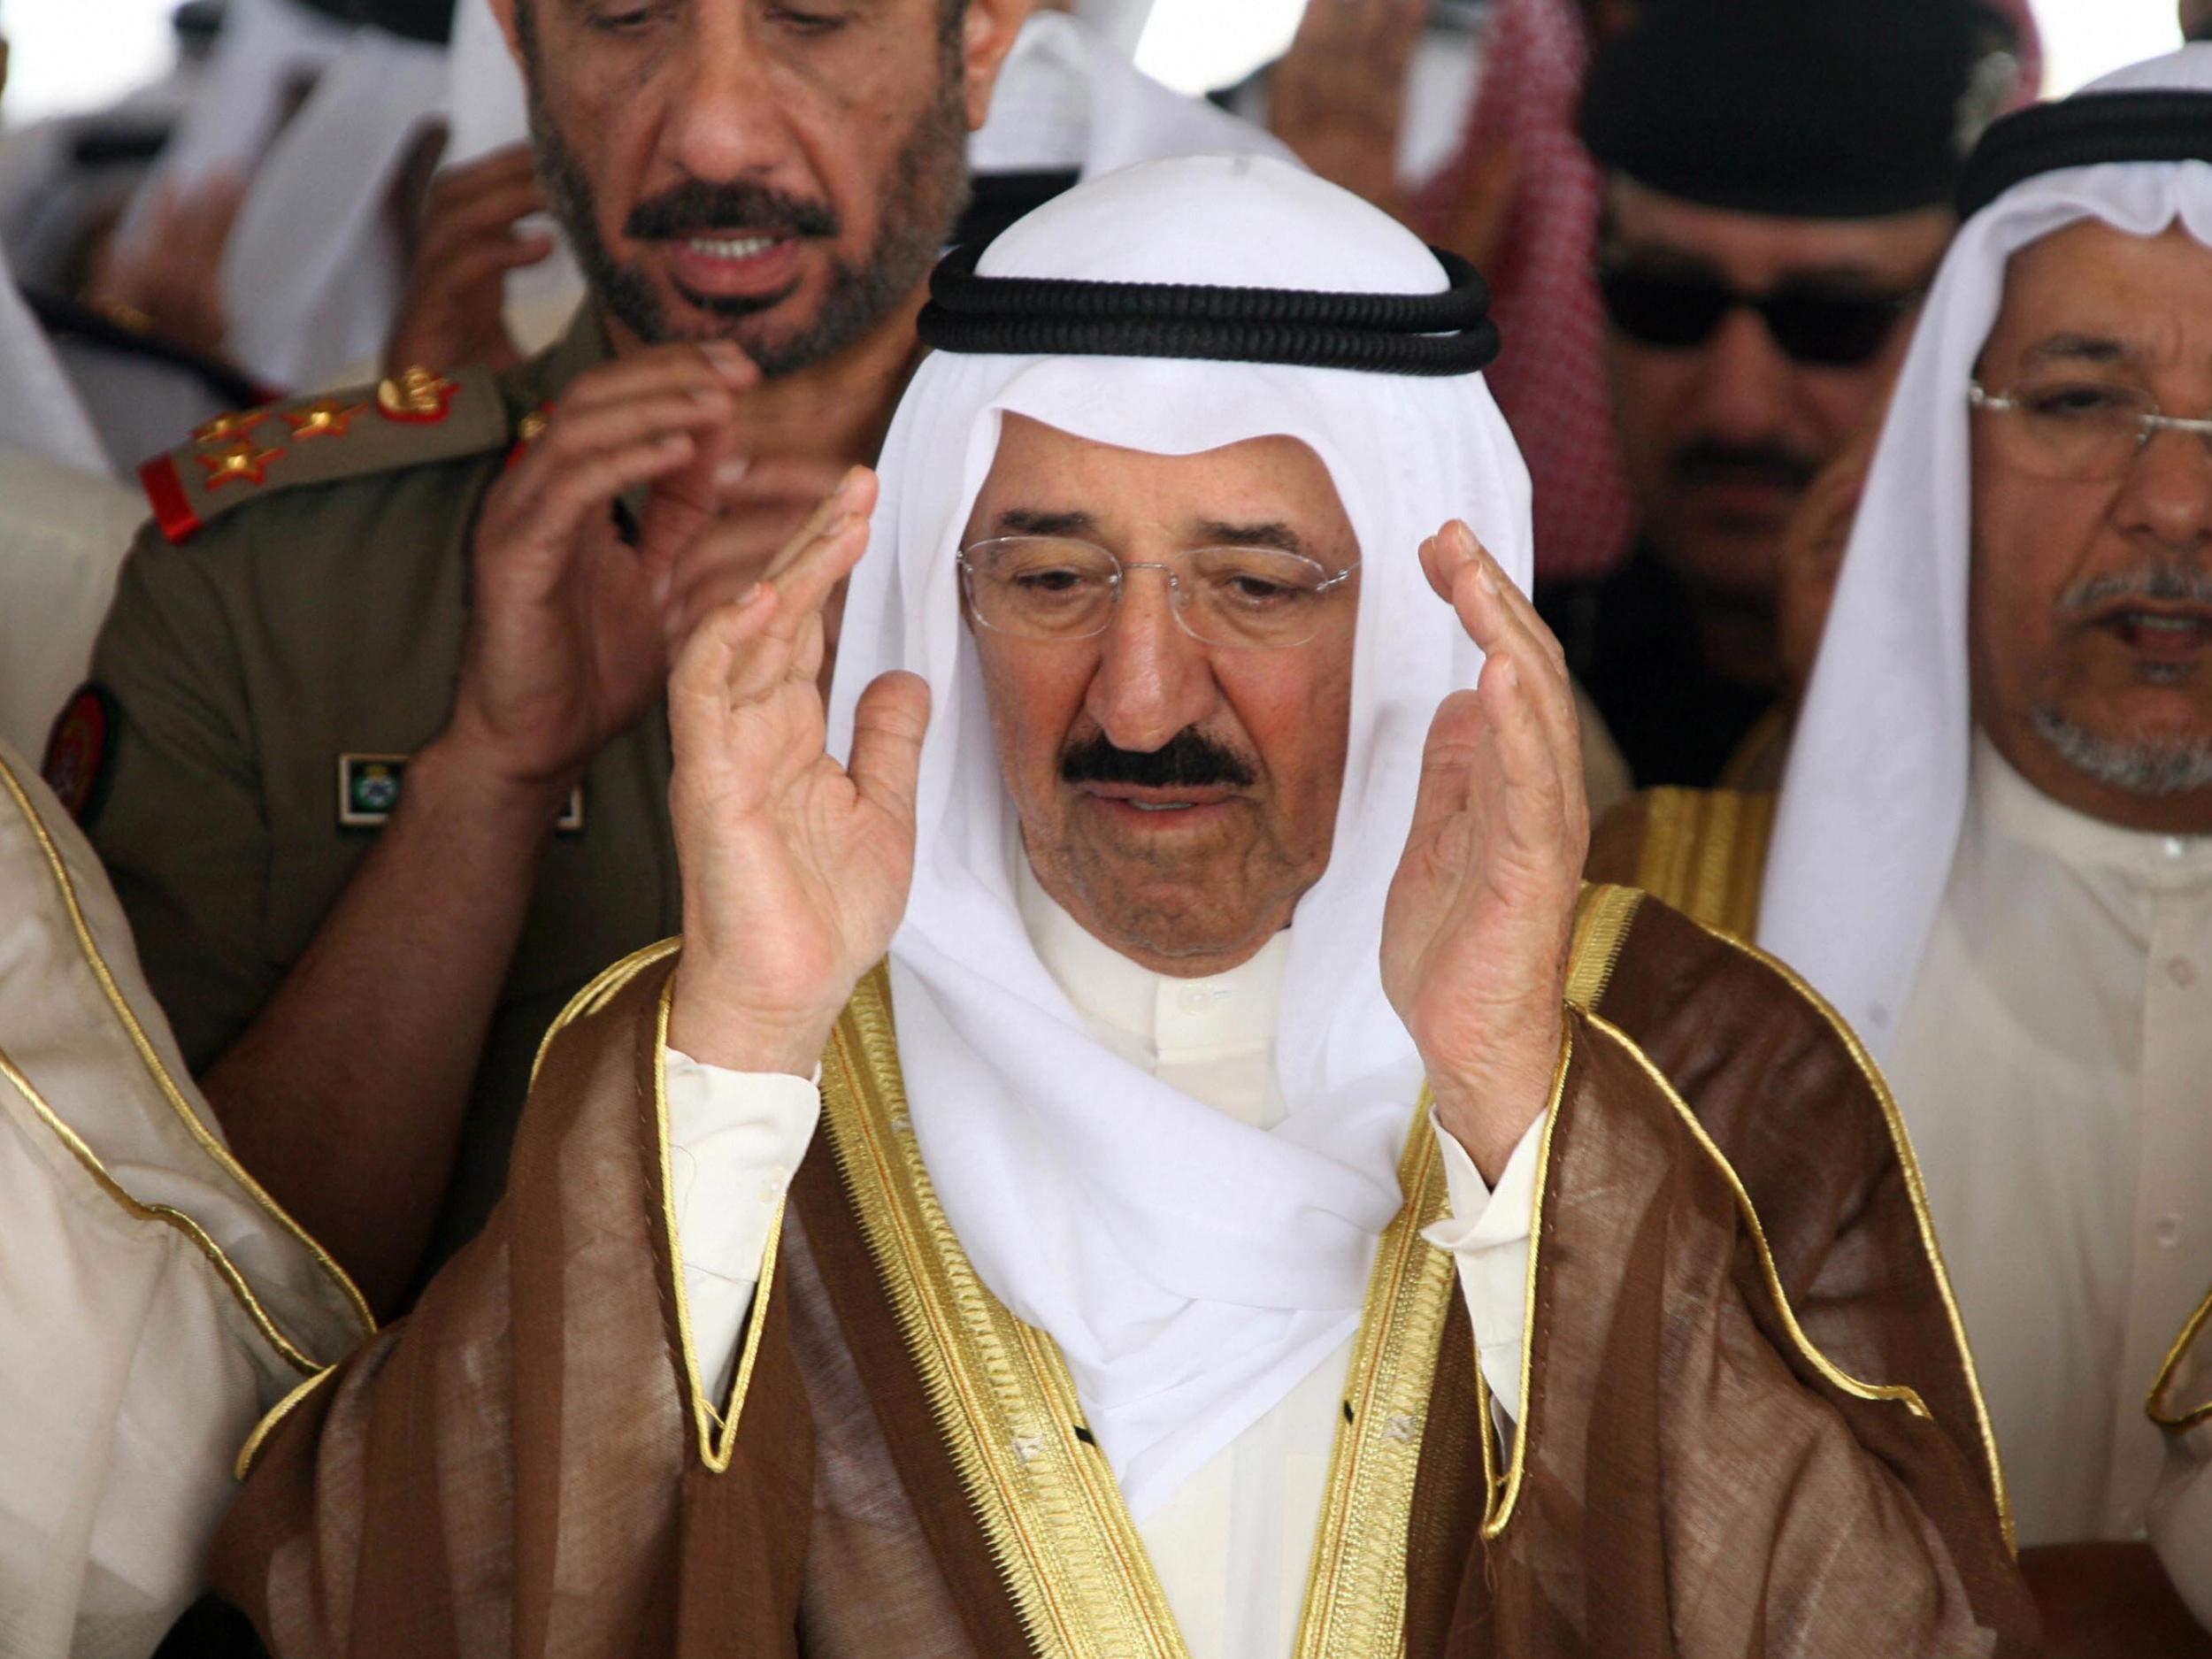 The Emir of Kuwait, whose nephew is one of the three jailed for the messages